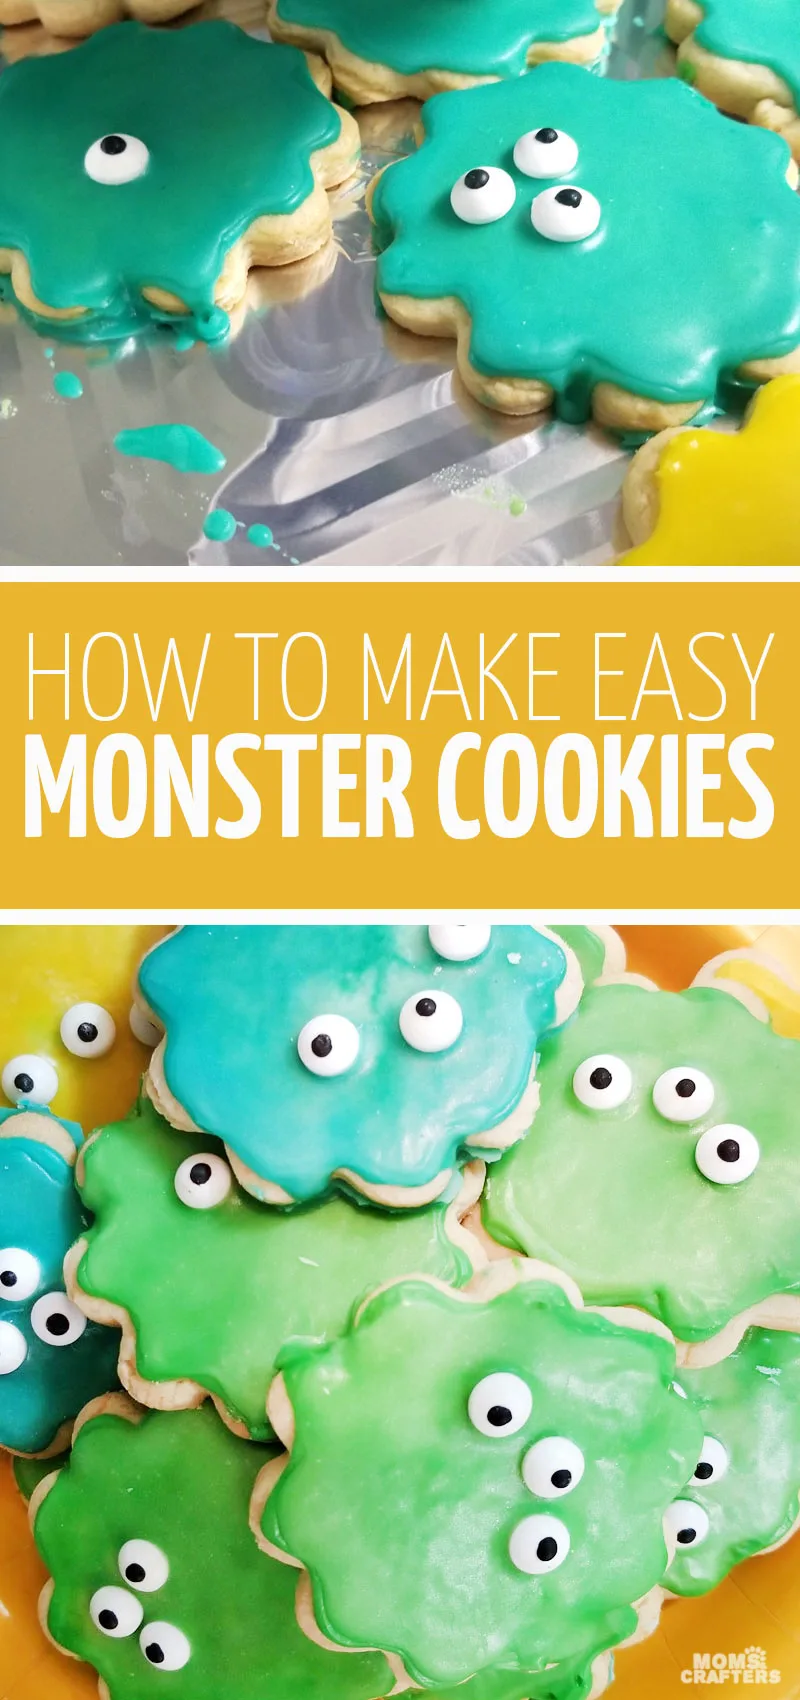 Check out these supre easy monster birthday party food ideas including these easy monster cookies using a royal icing hack and candy eyes!